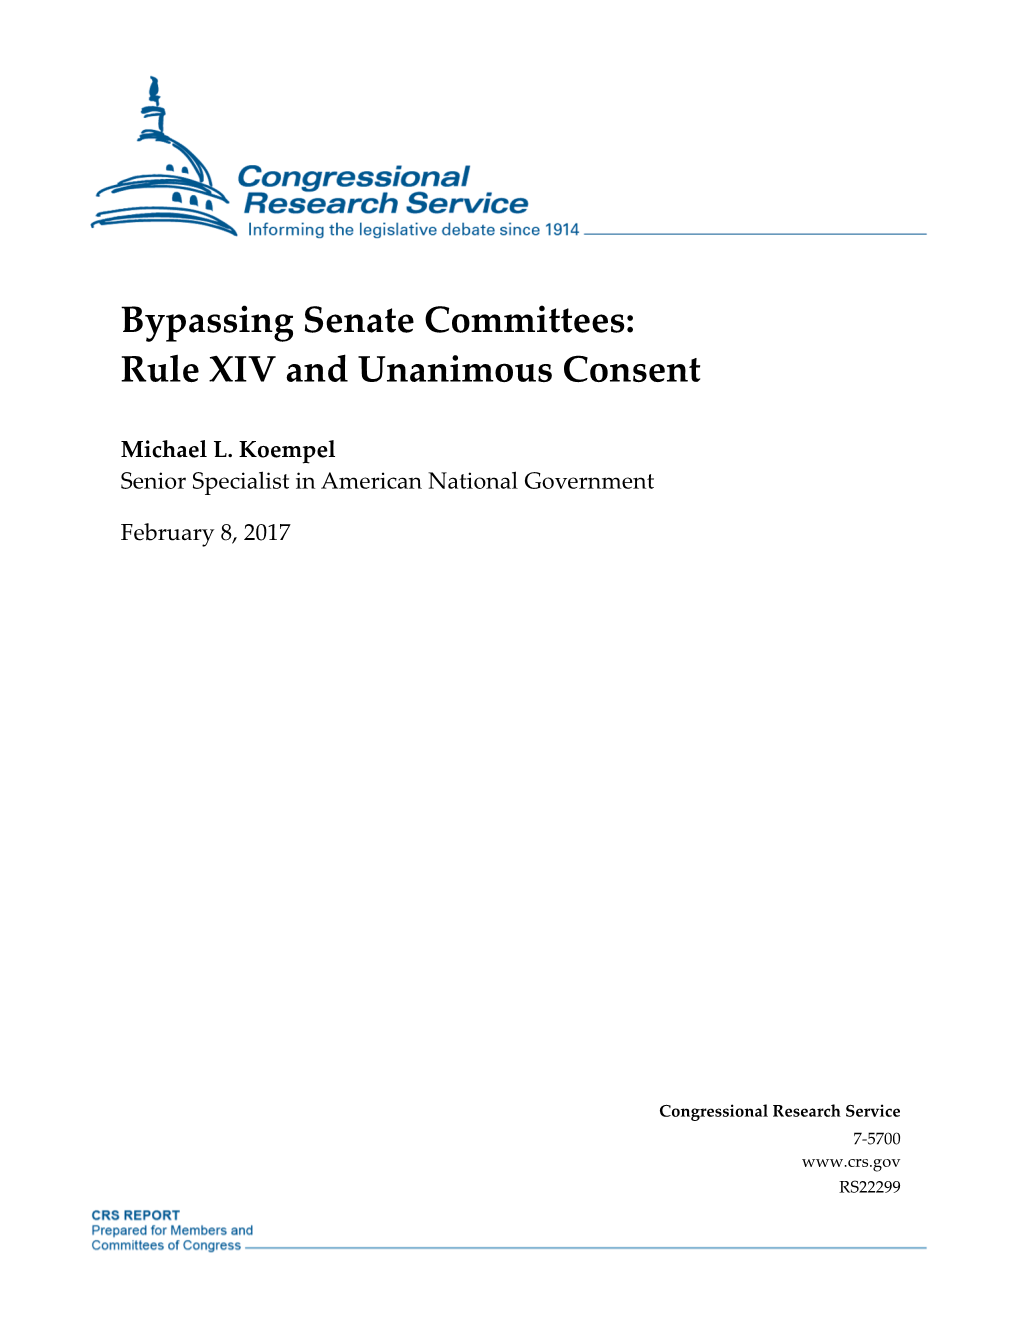 Bypassing Senate Committees: Rule XIV and Unanimous Consent